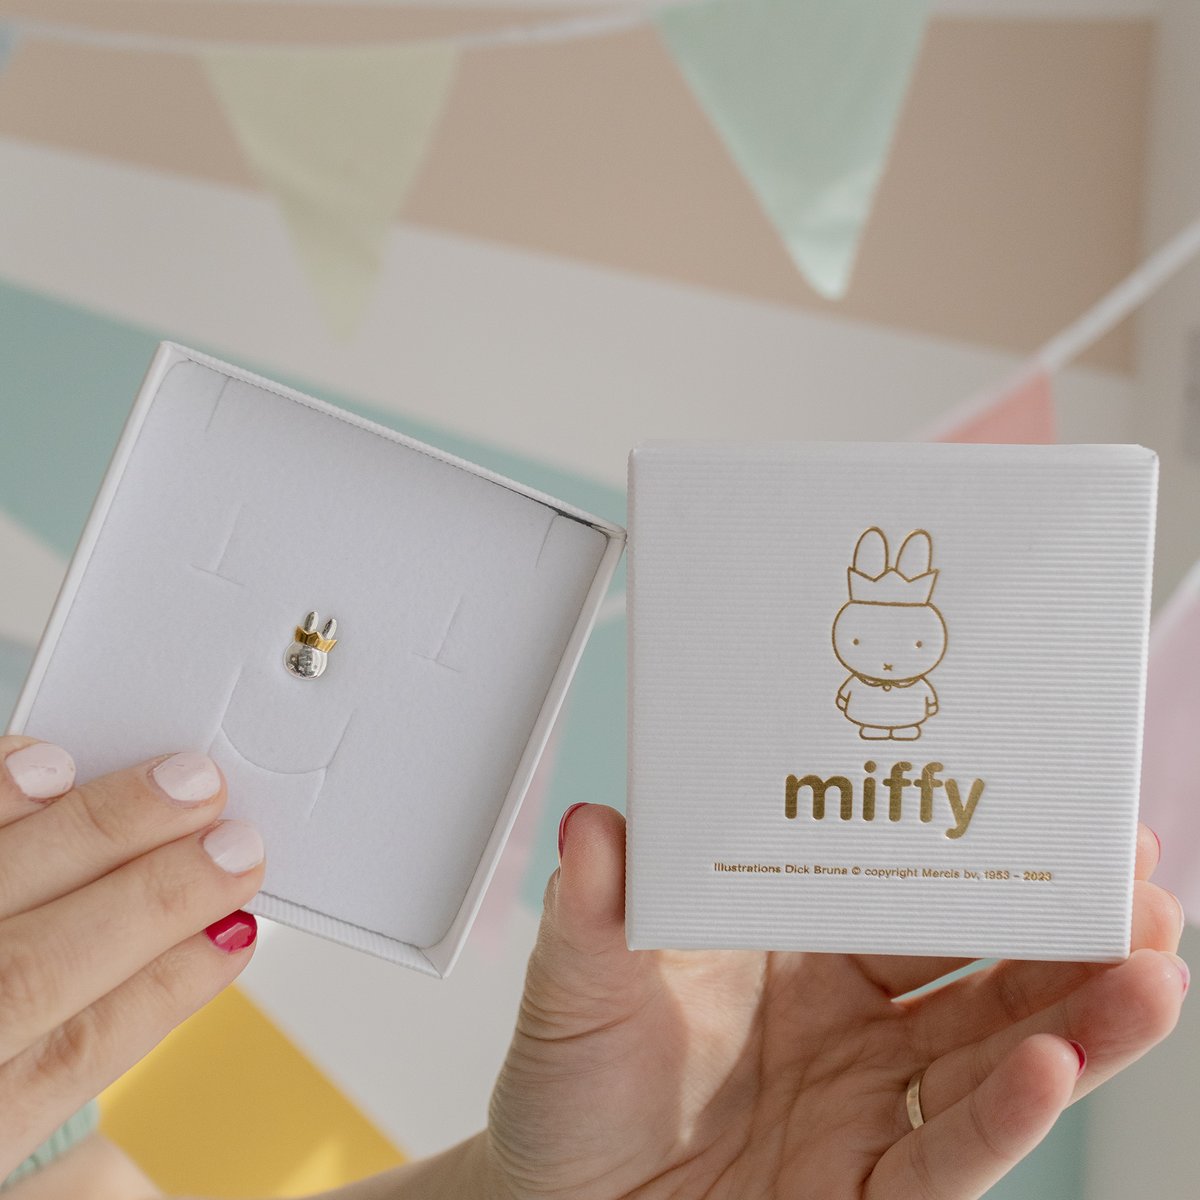 Embrace the cuteness! Our Queen Miffy Brooch is on sale. It's fluffy, adorable, and perfect for Miffy fans. Get yours now! bit.ly/3Oc7nDl #MiffyStyle #CuteSale